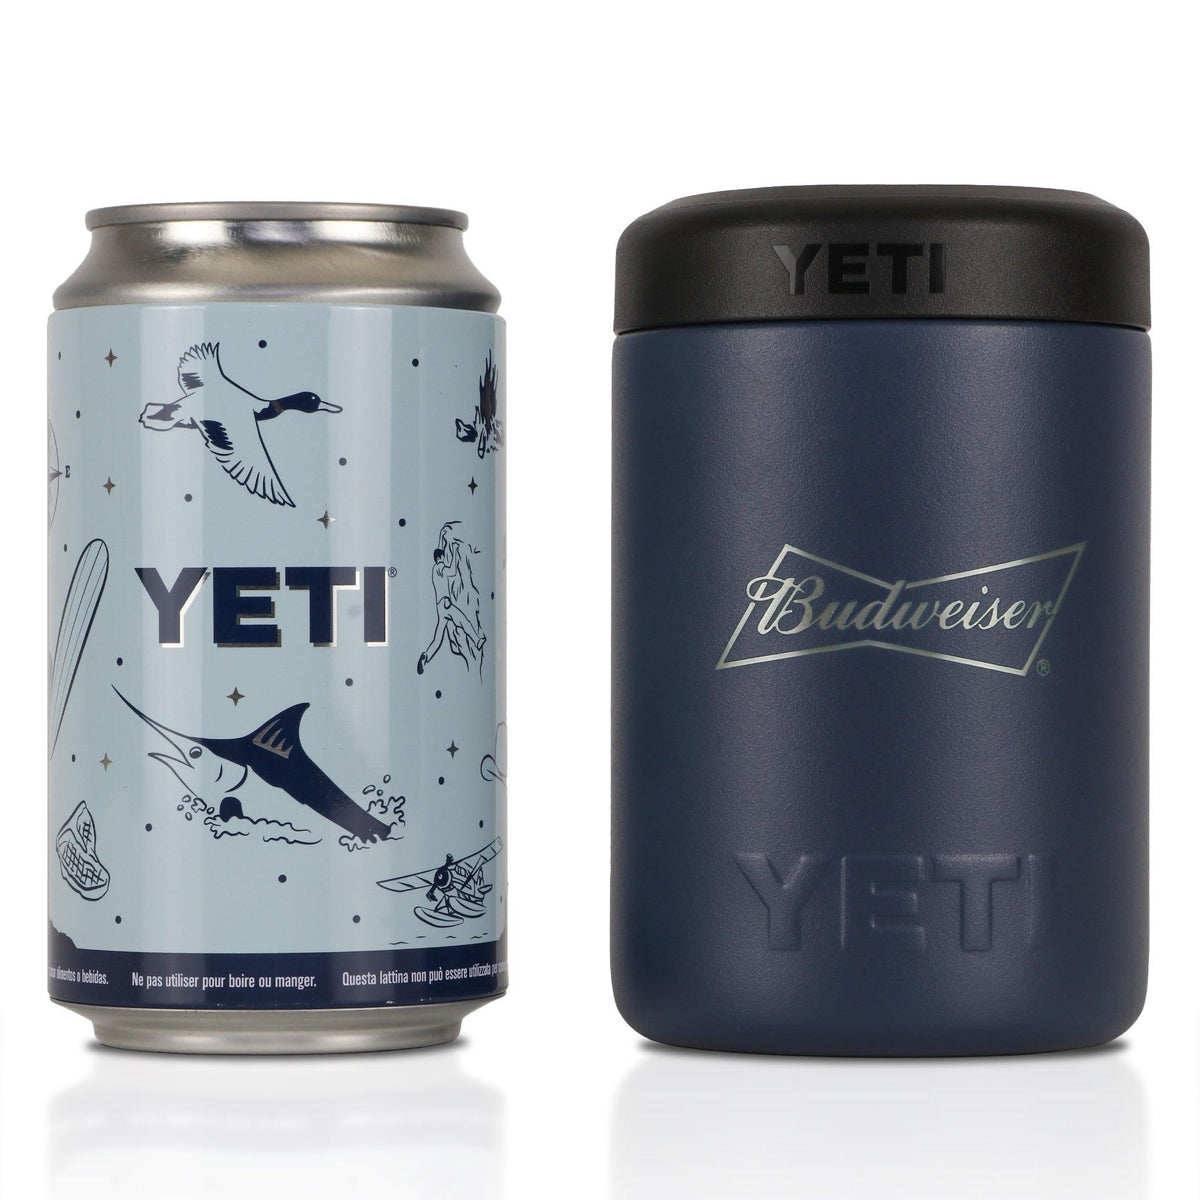 https://www.shopbeergears.shop/wp-content/uploads/1692/92/looking-for-a-budweiser-yeti-12oz-can-colster-budweiser-to-buy-get-it-now-before-they-are-gone_3.jpg